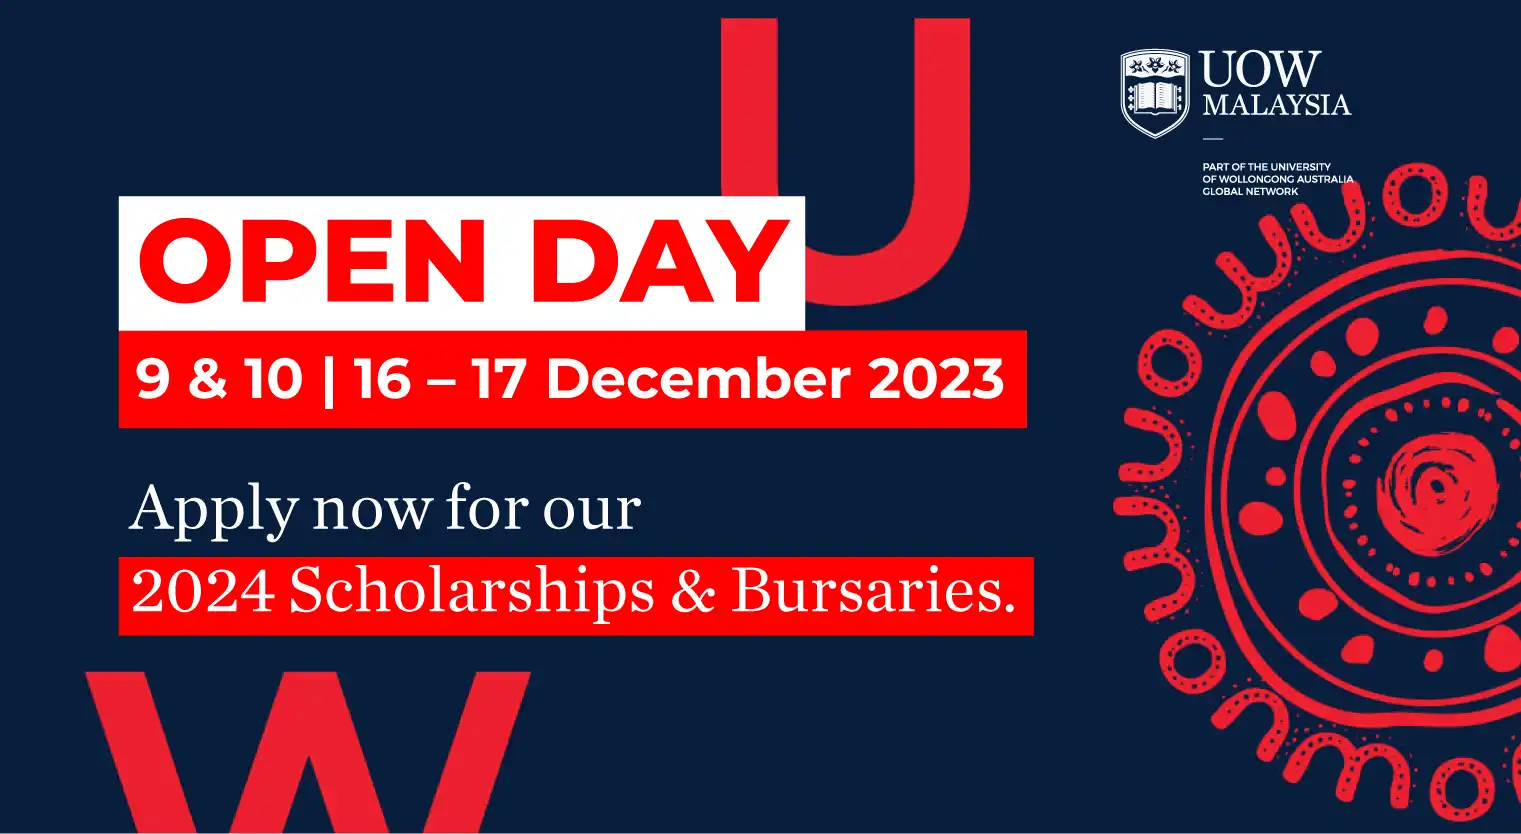 uow-malaysia-open-day-december-2023